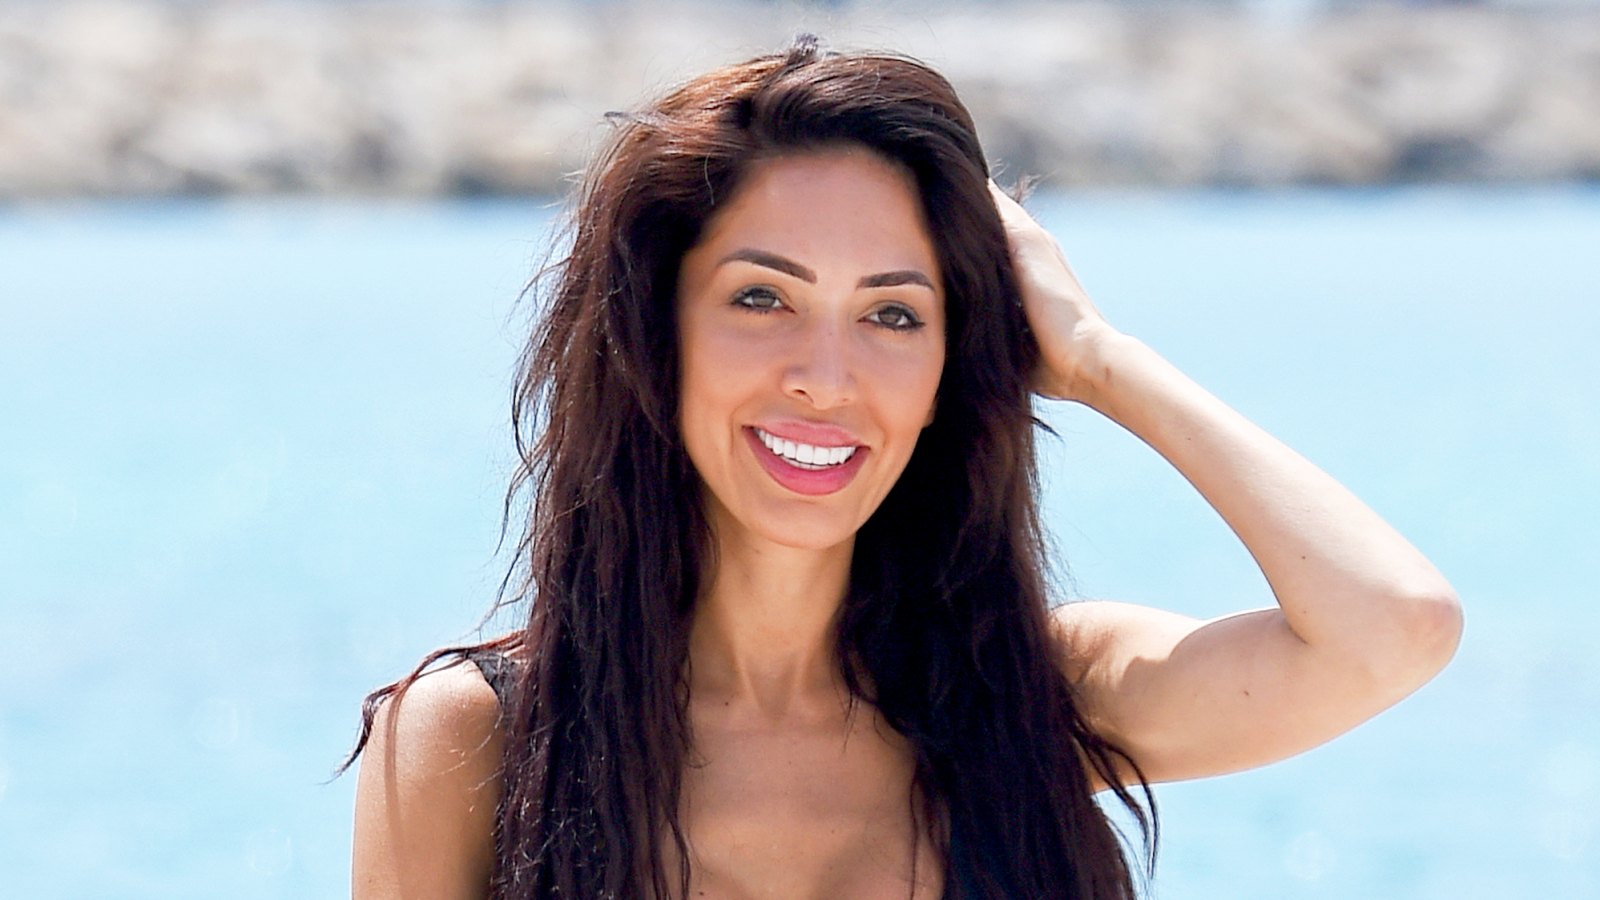 Farrah Abraham at the beach in Cannes on May 17, 2018.